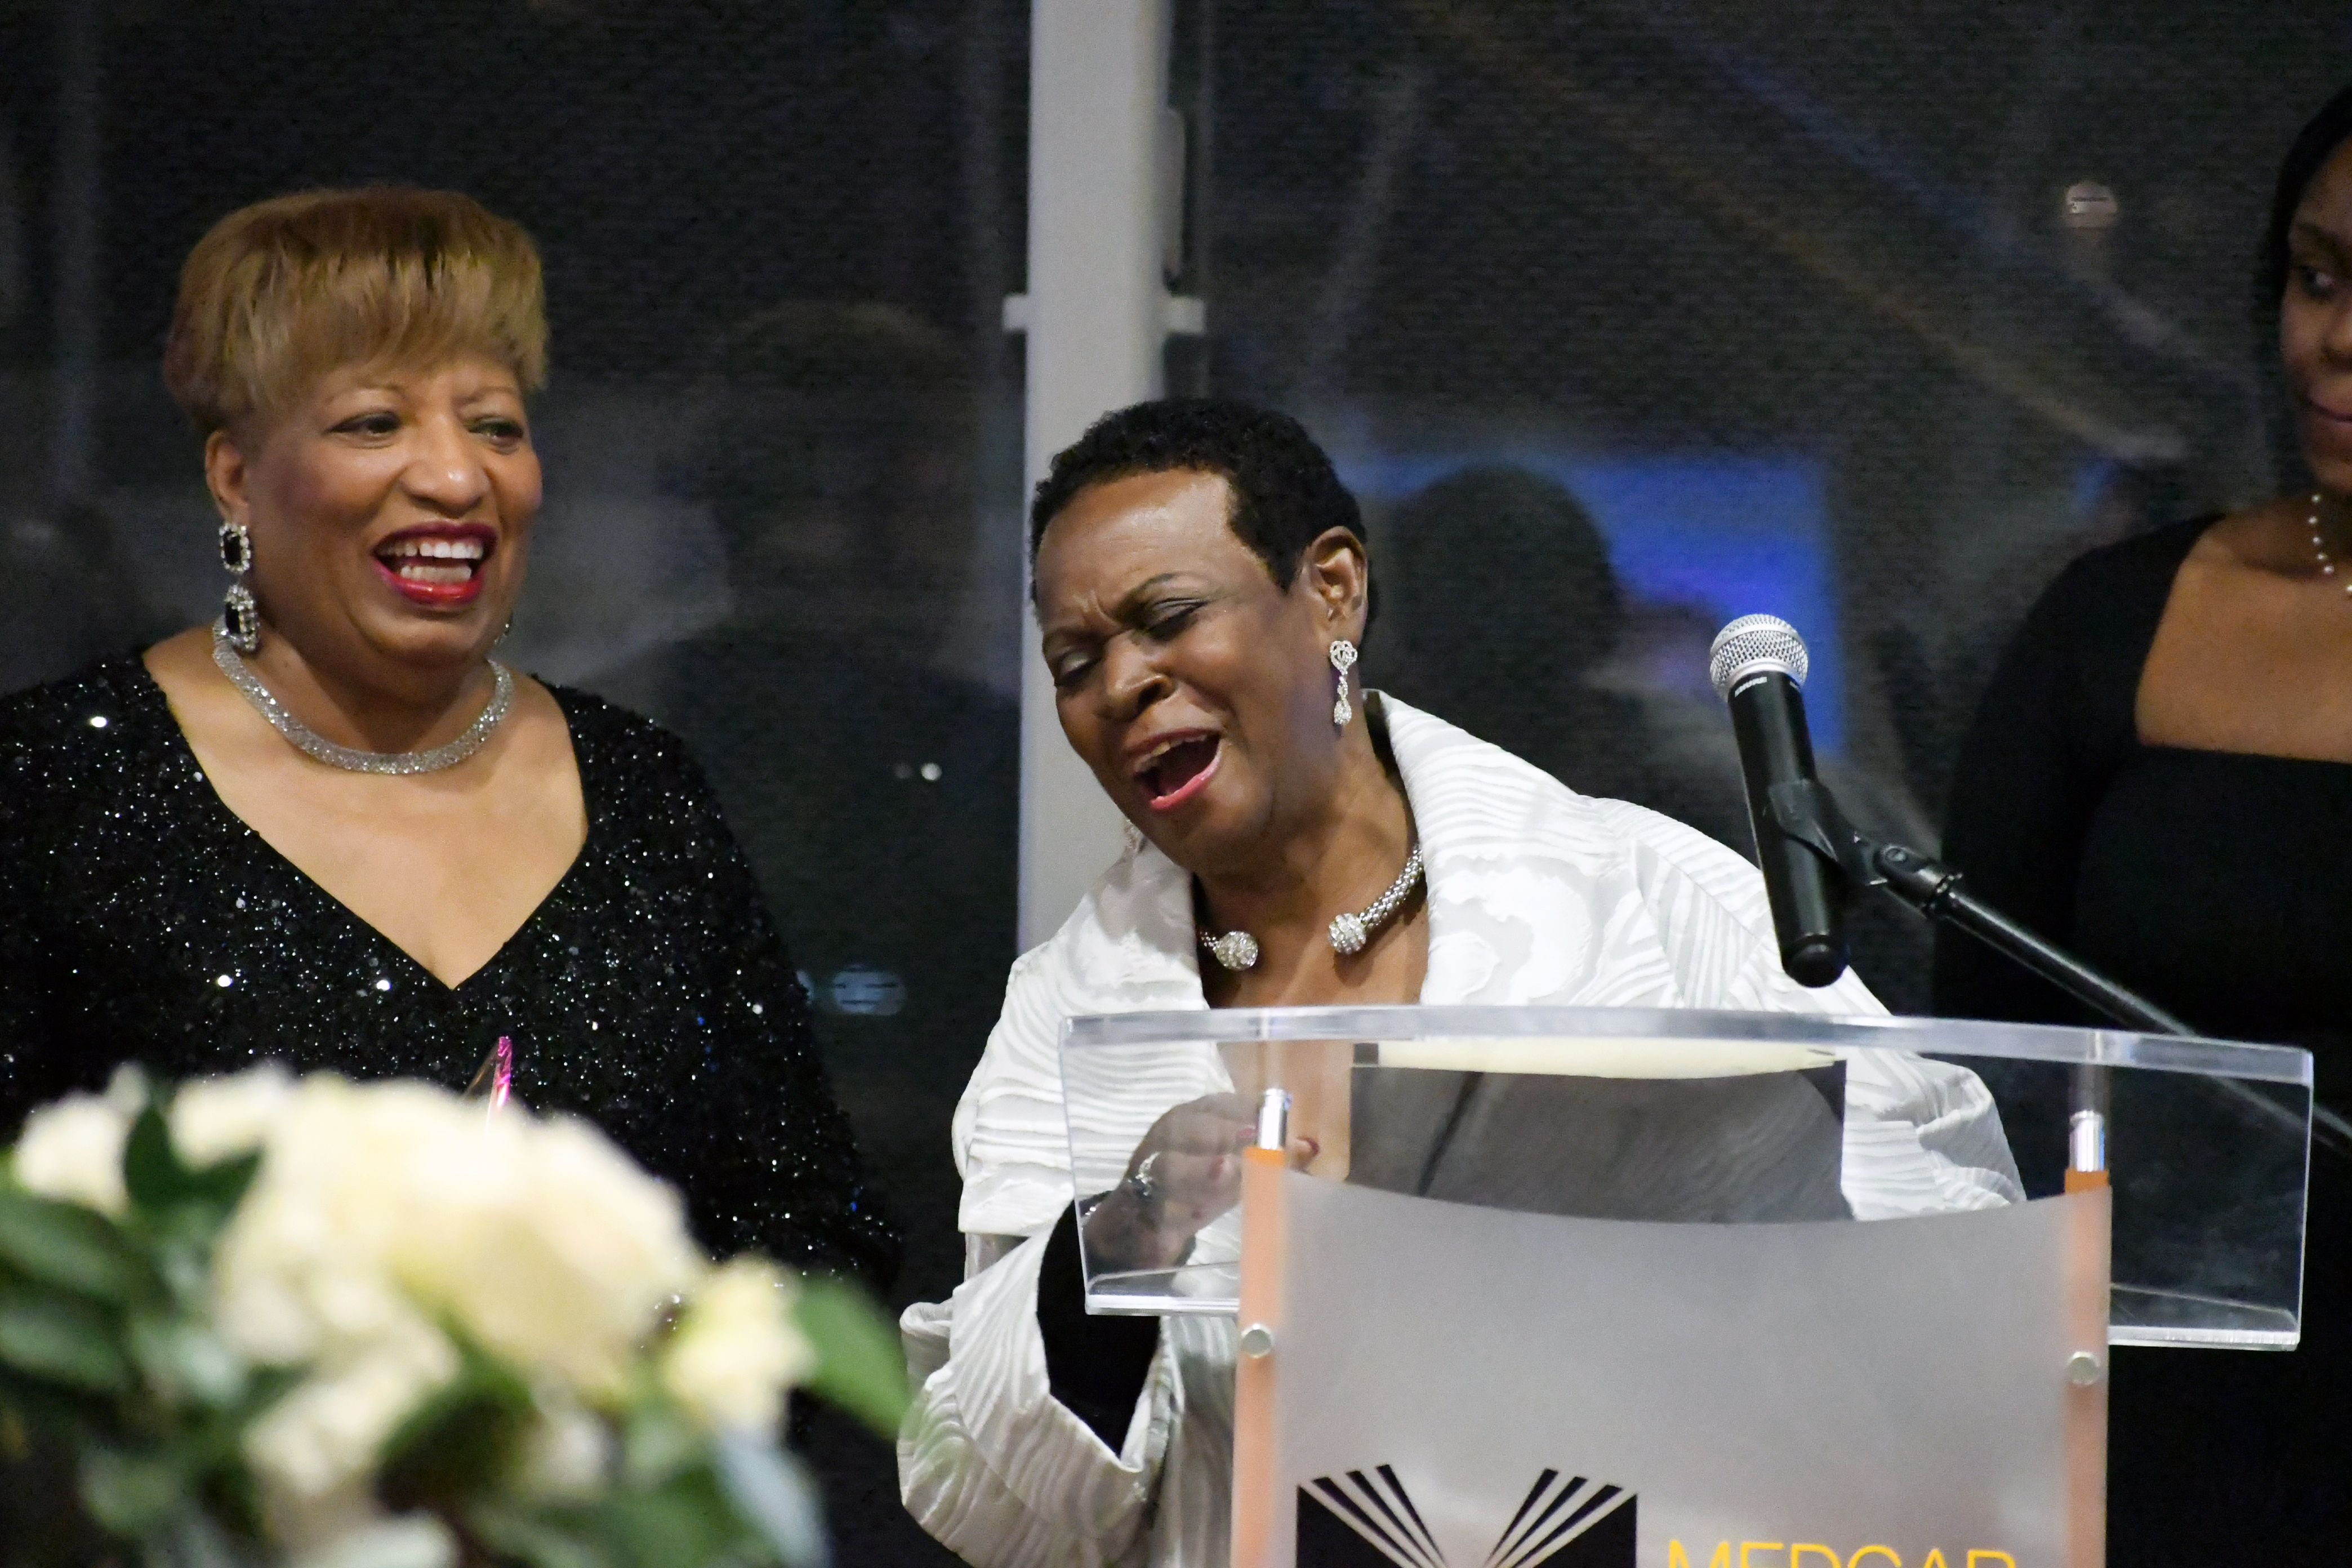 The Honorable Annette Robinson sharing a laugh with Medgar Evers College President, Dr. Patricia Ramsey